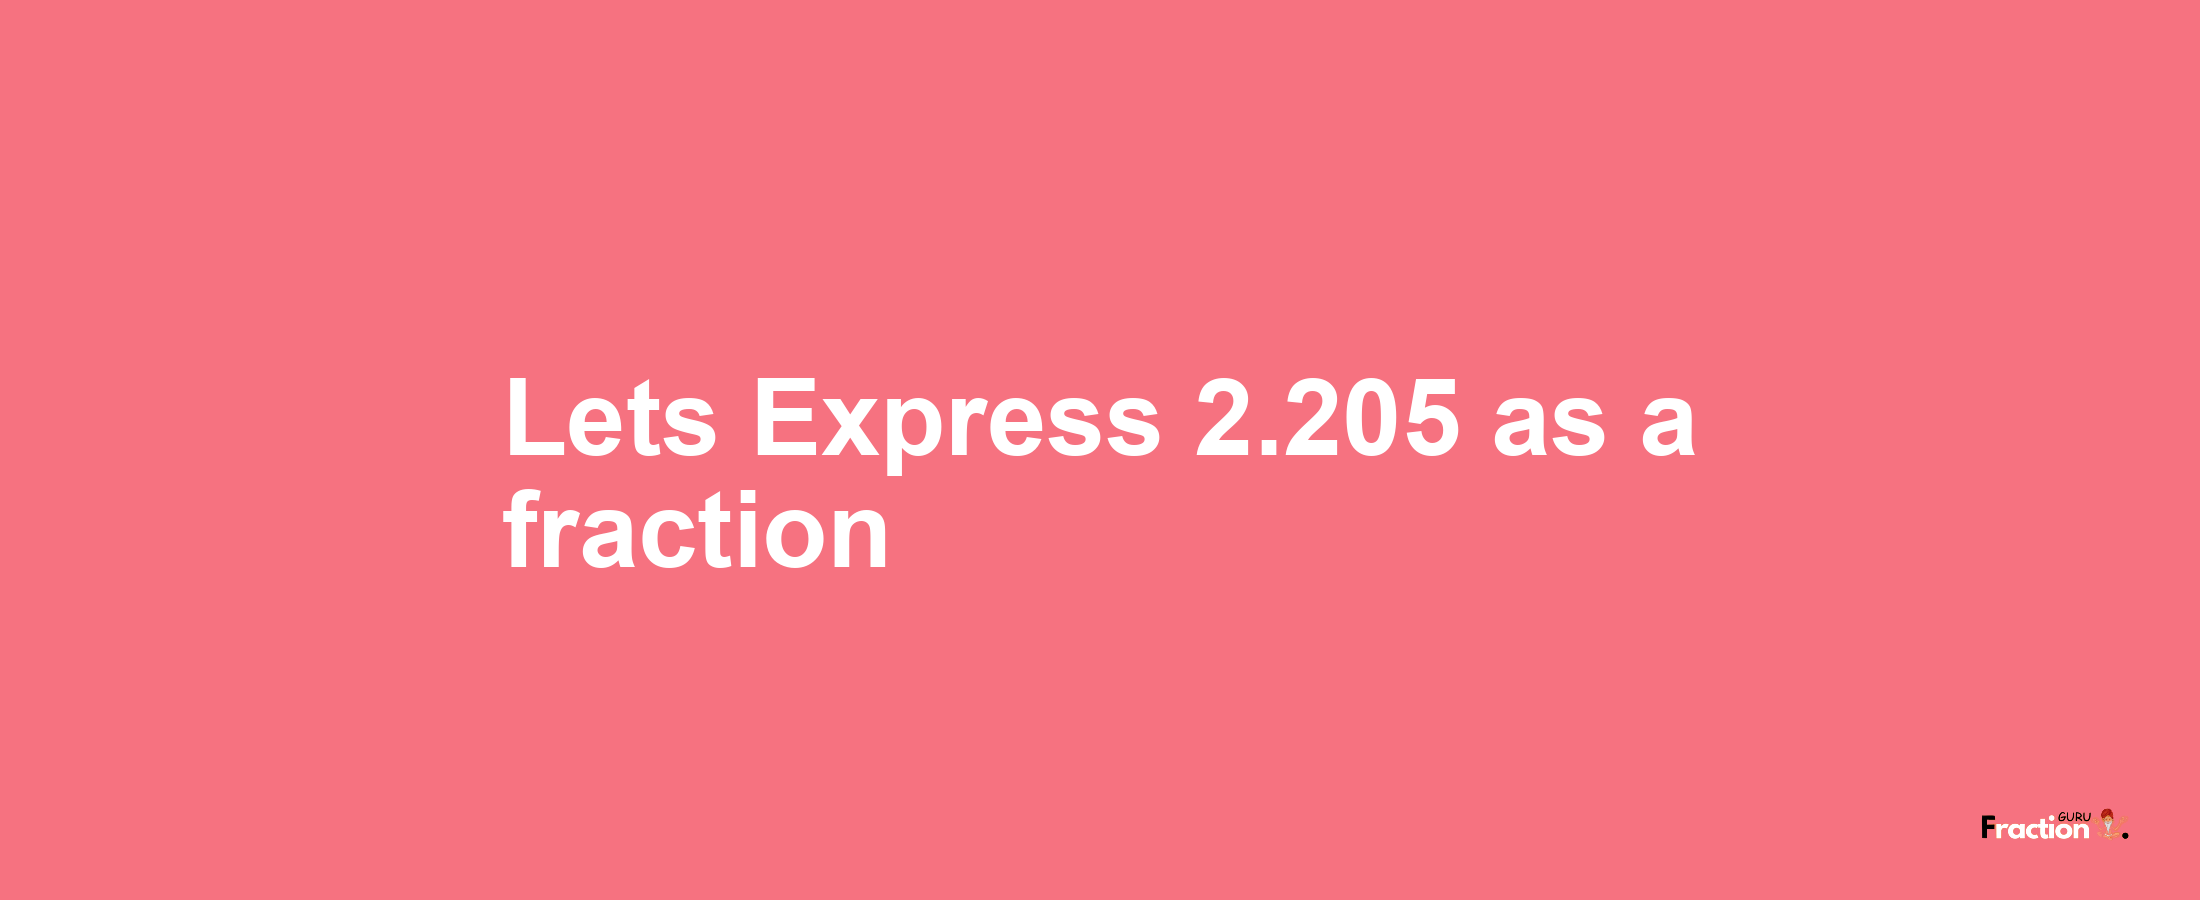 Lets Express 2.205 as afraction